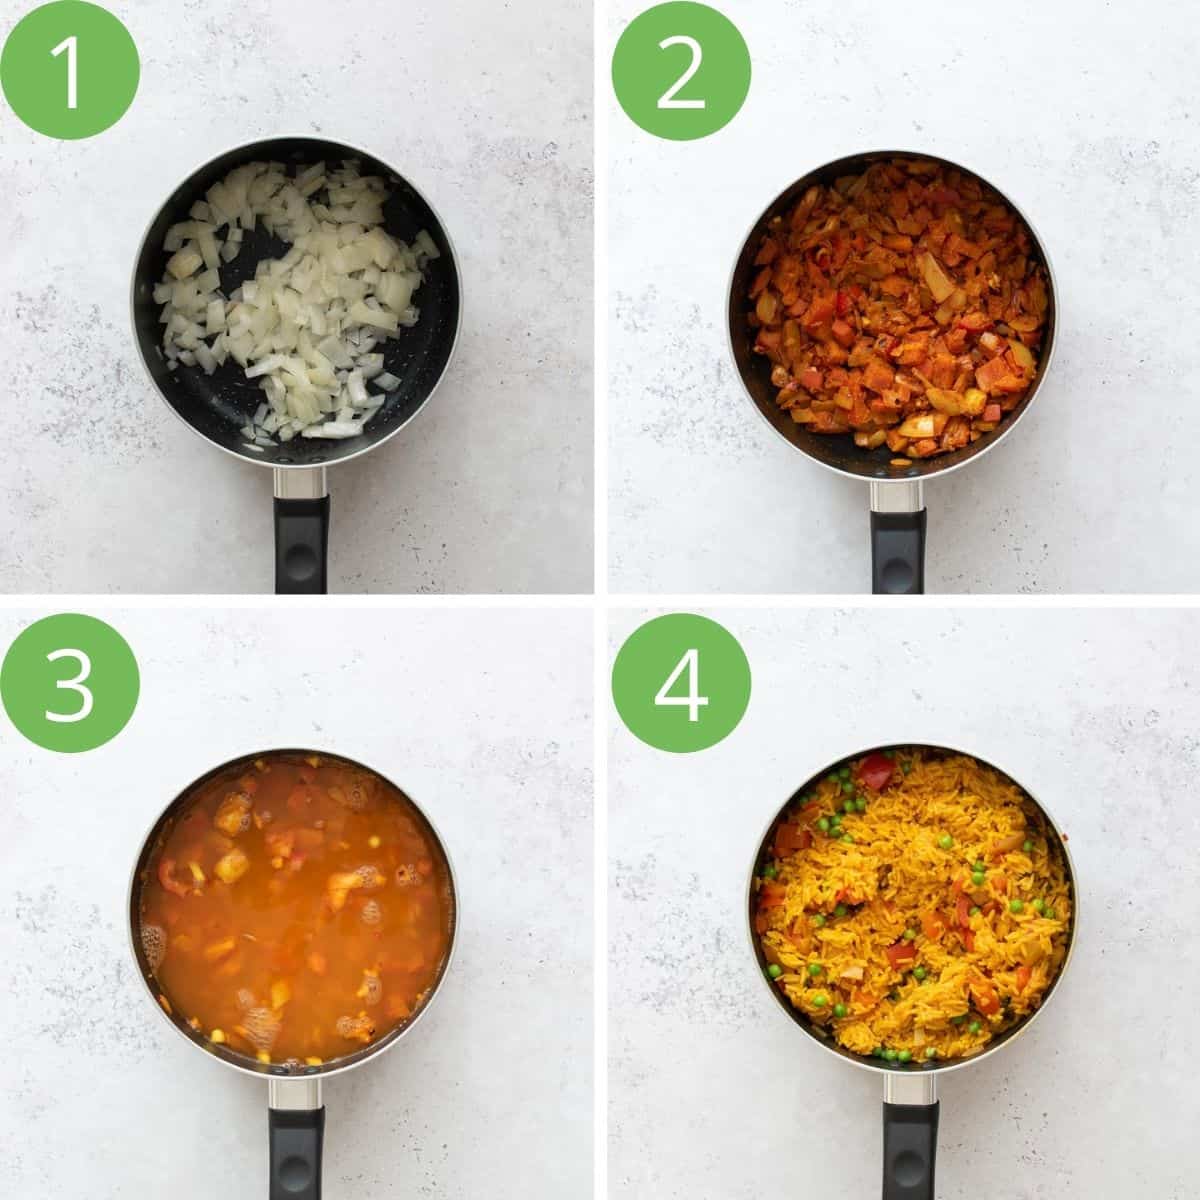 Step by step how to make this recipe.